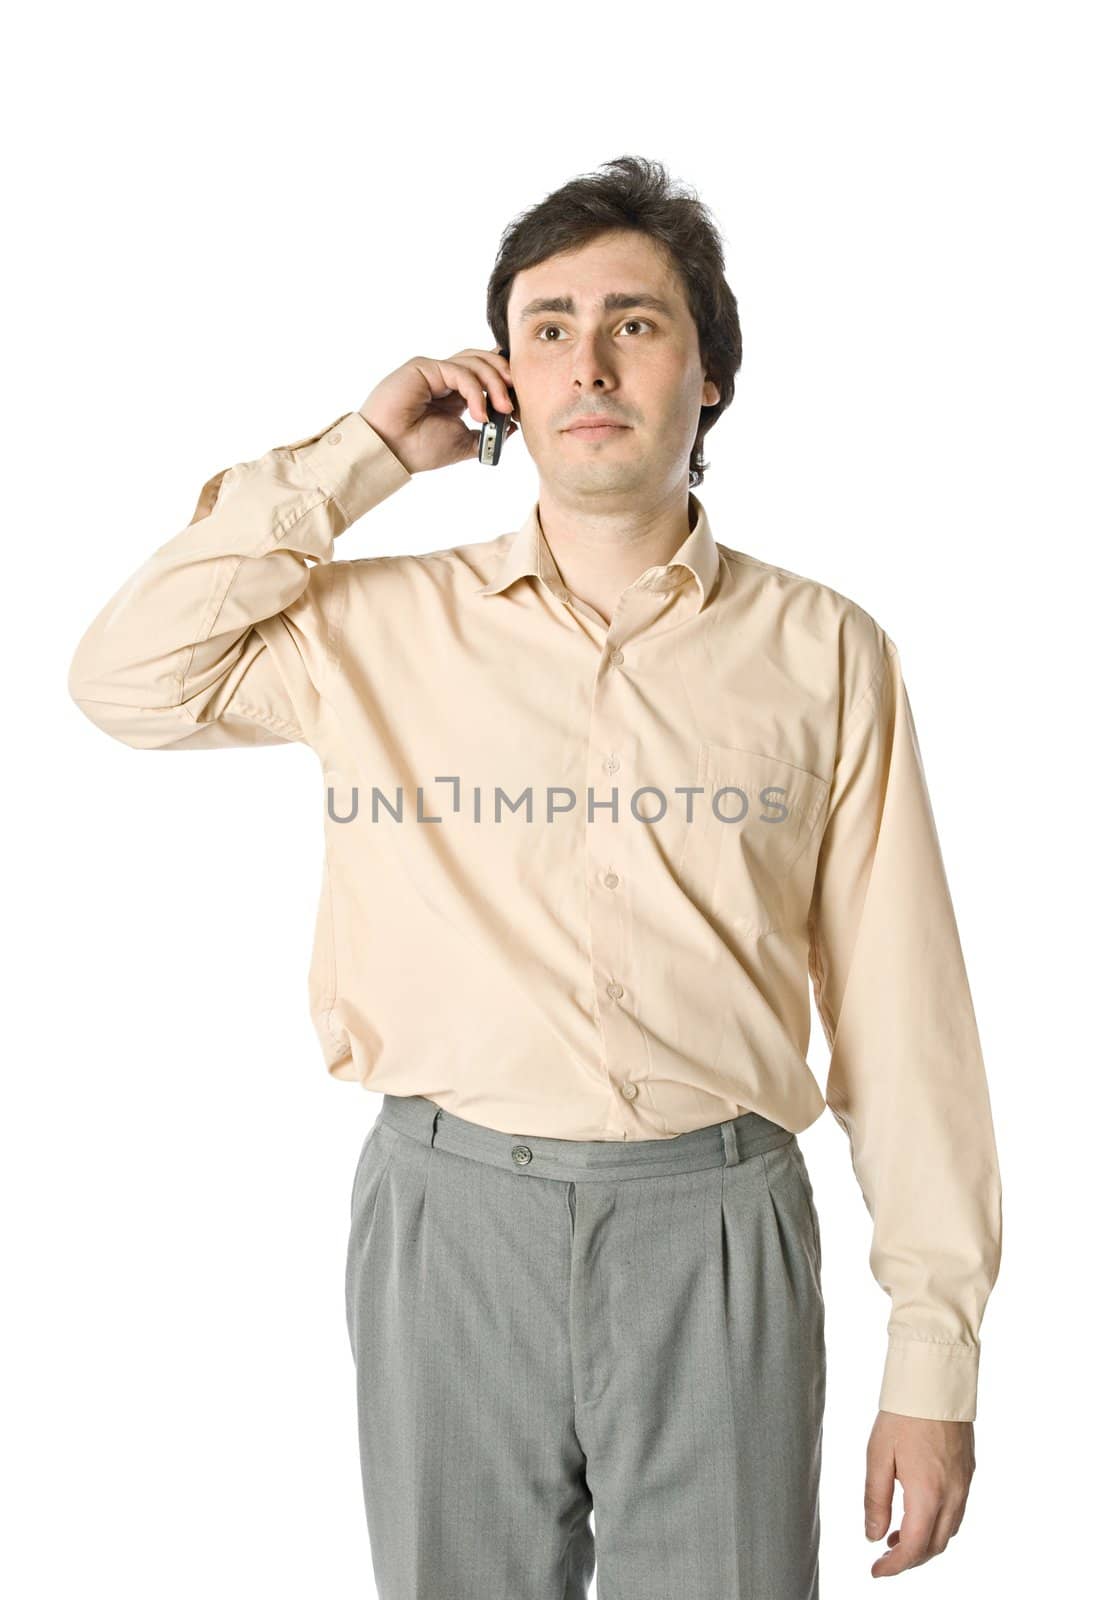 A man with a cellphone listening to something